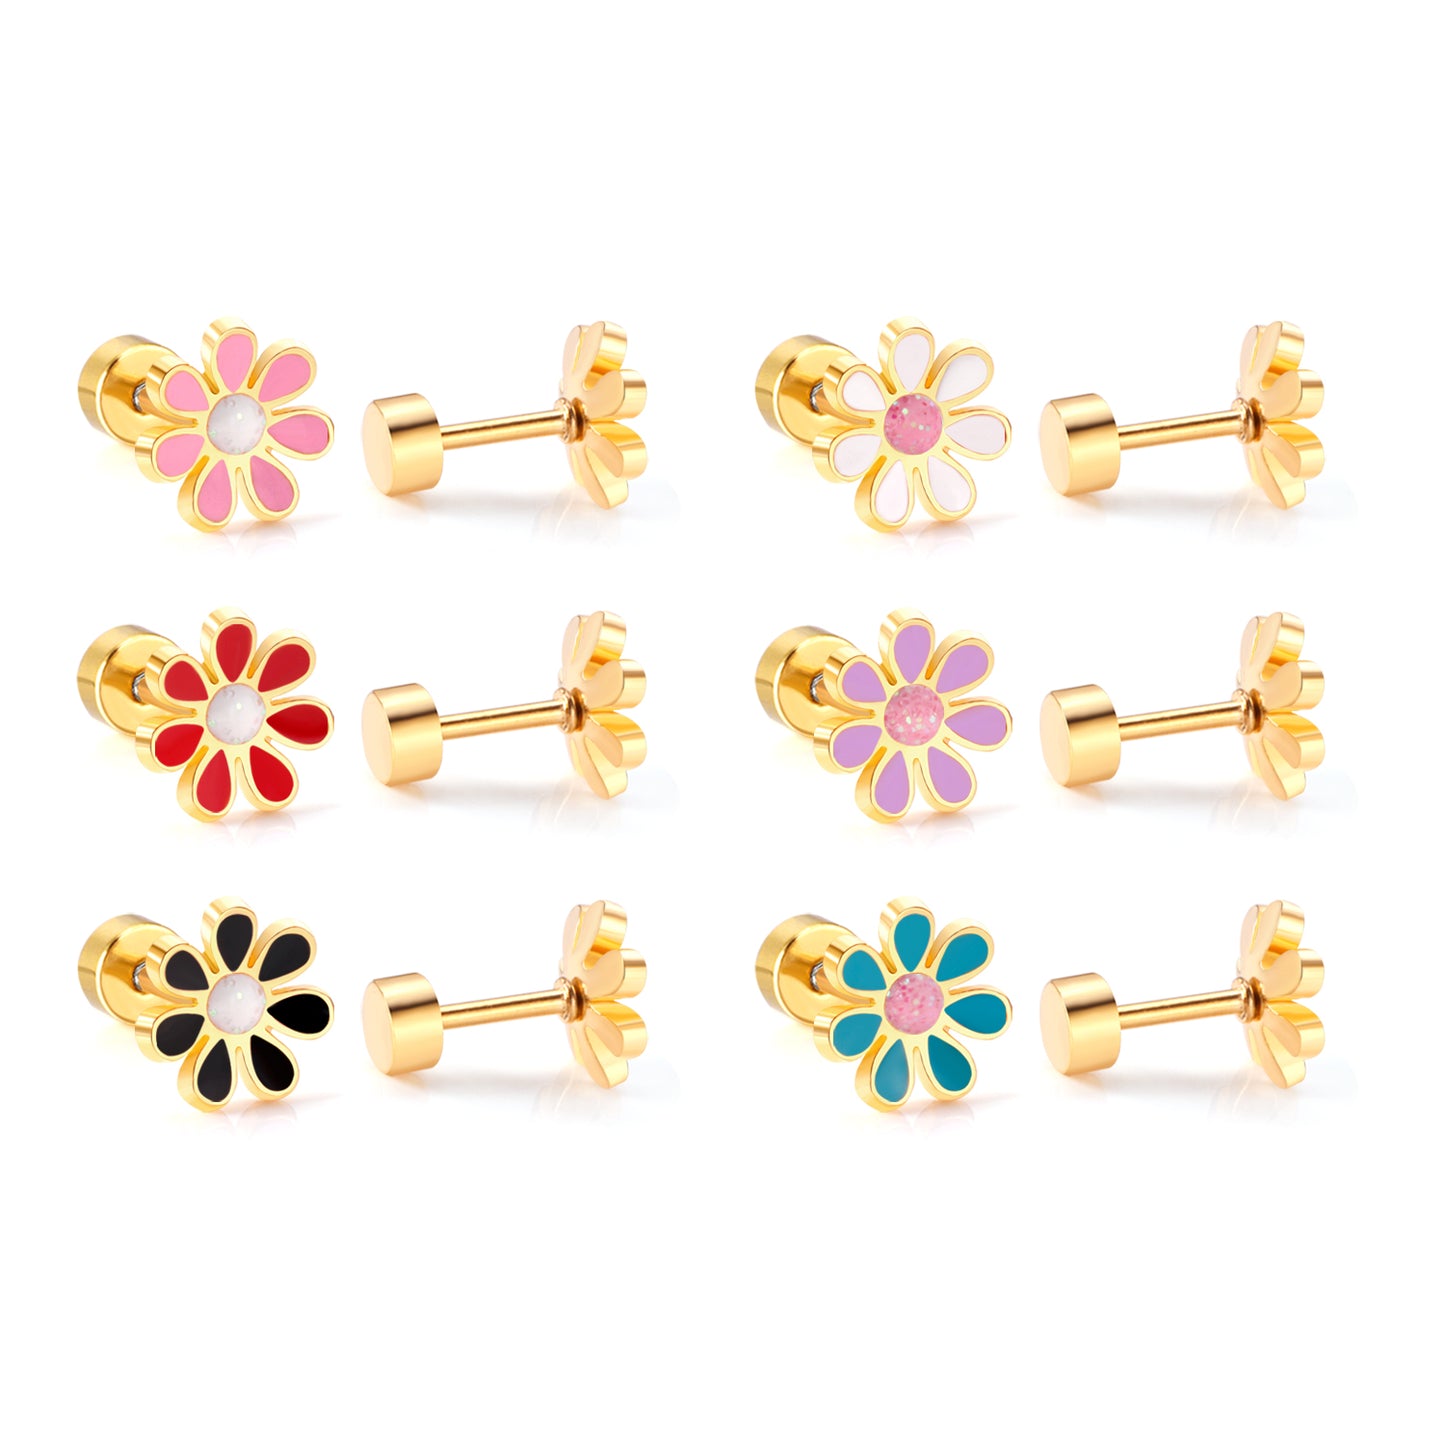 Children's Earrings:  Surgical Steel with Gold IP Blue/Pink Flowers with Screw Backs